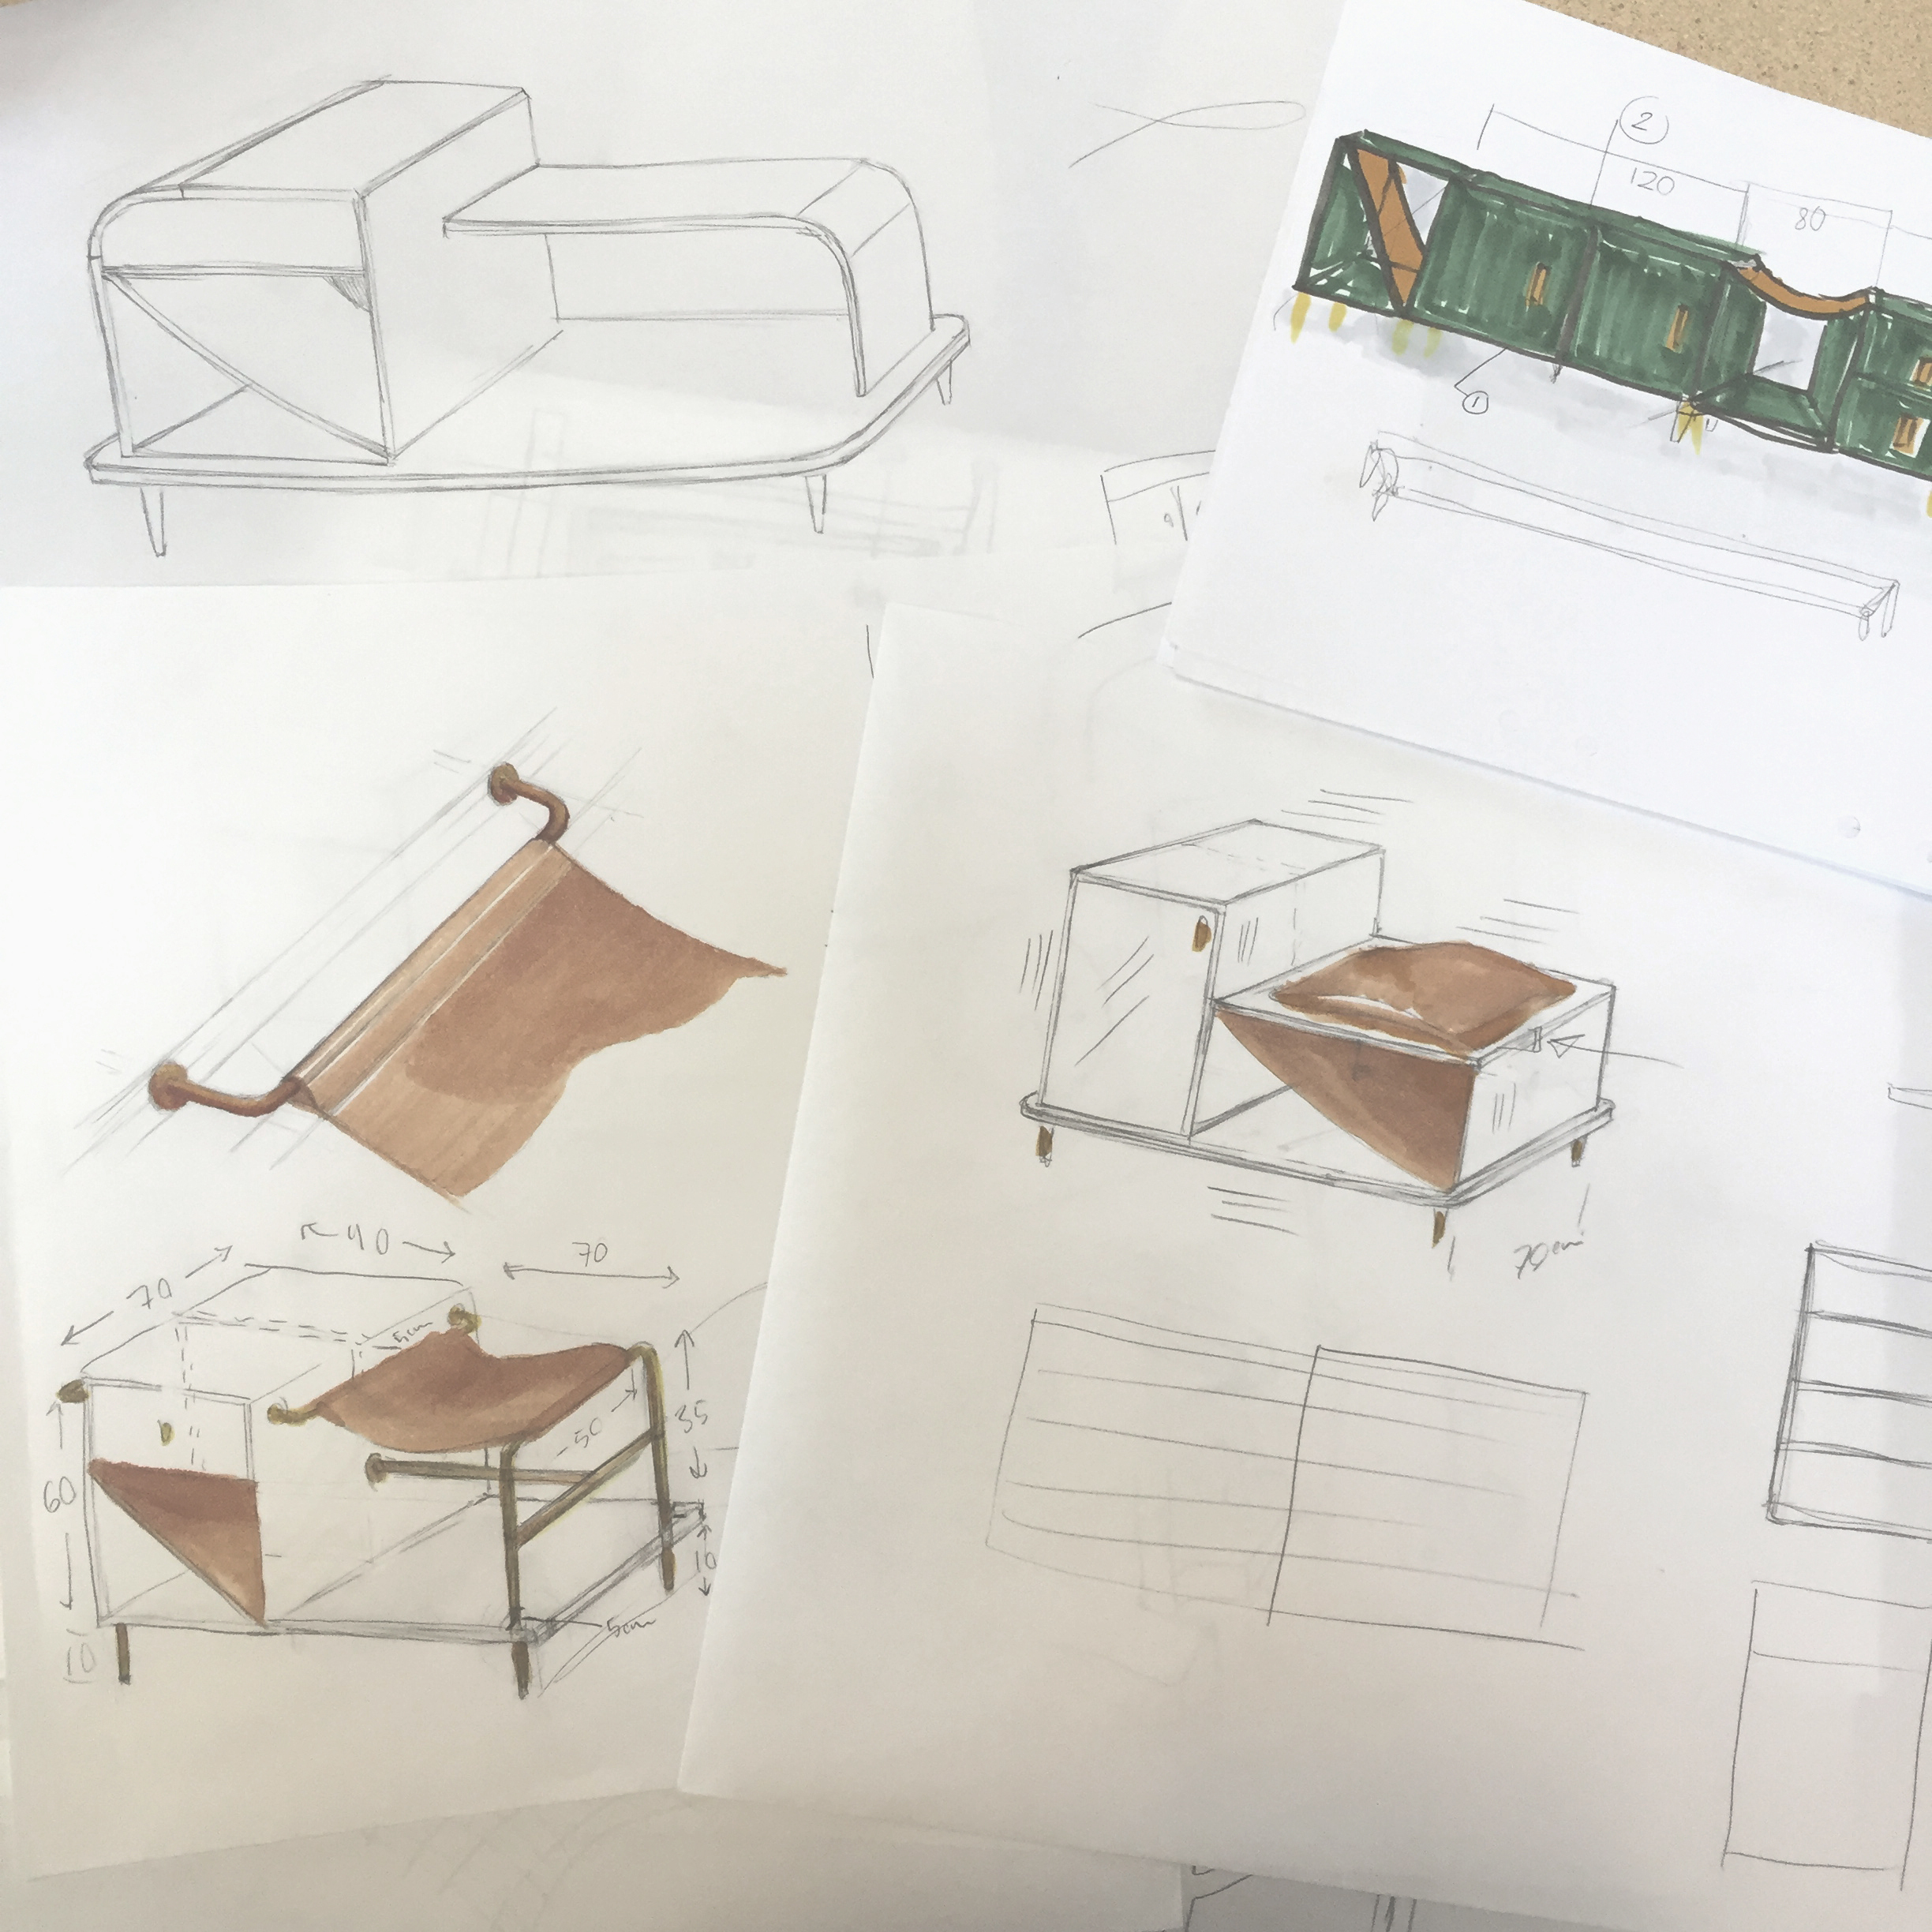 Combination furniture sketches, by Sebastian Galo